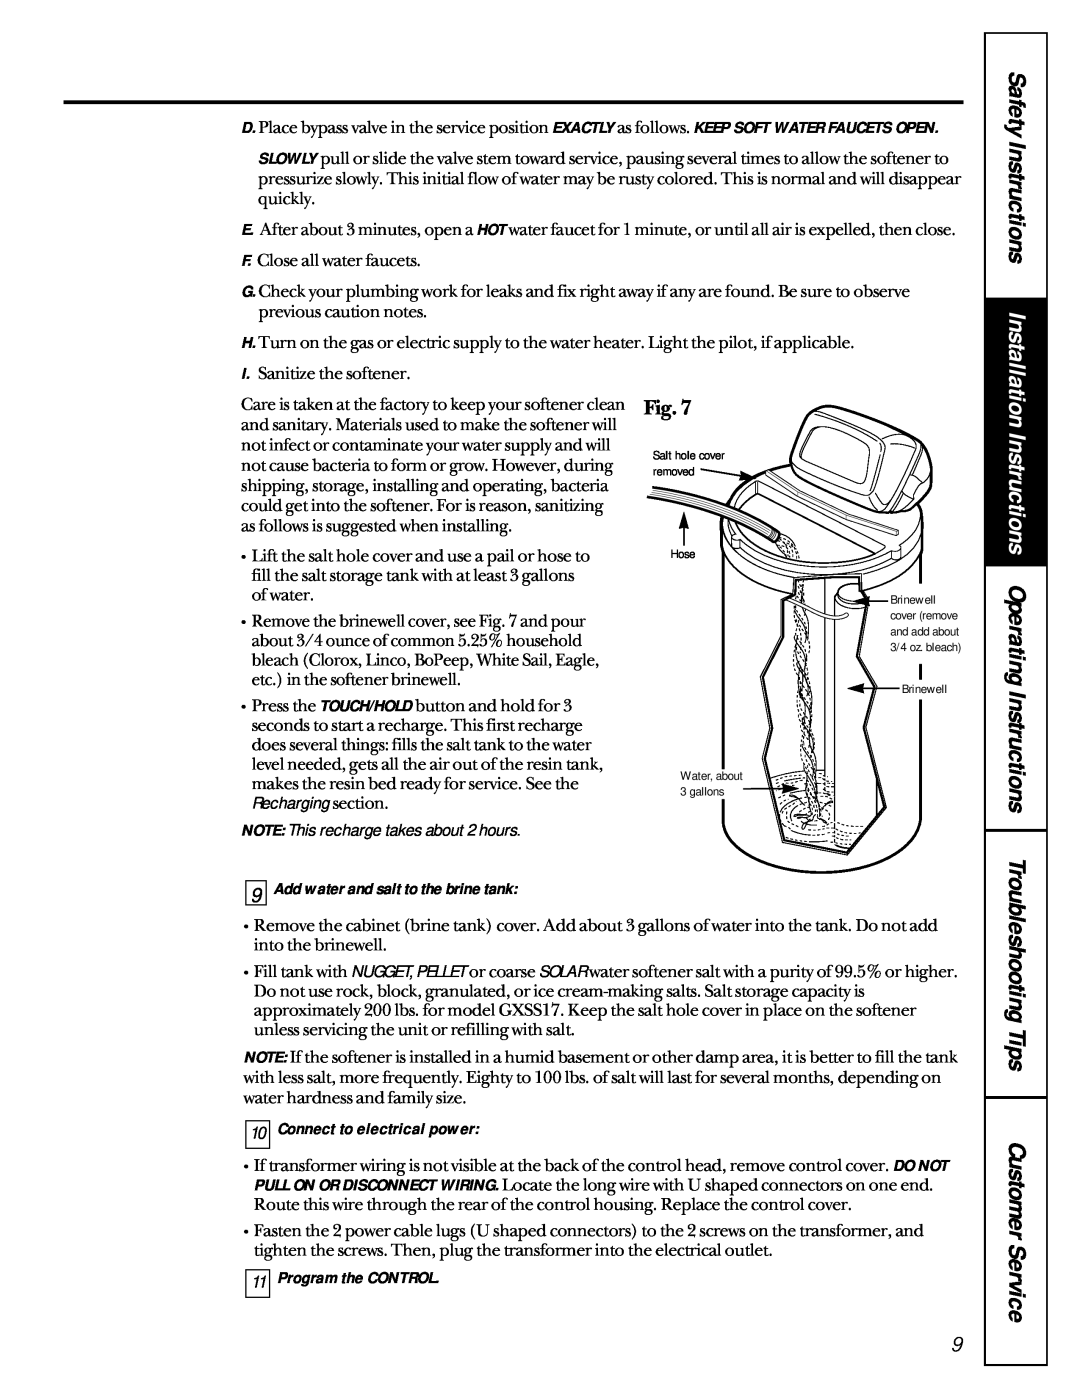 GE 6000A Troubleshooting Tips Customer Service, Safety Instructions Installation, Instructions Operating Instructions 